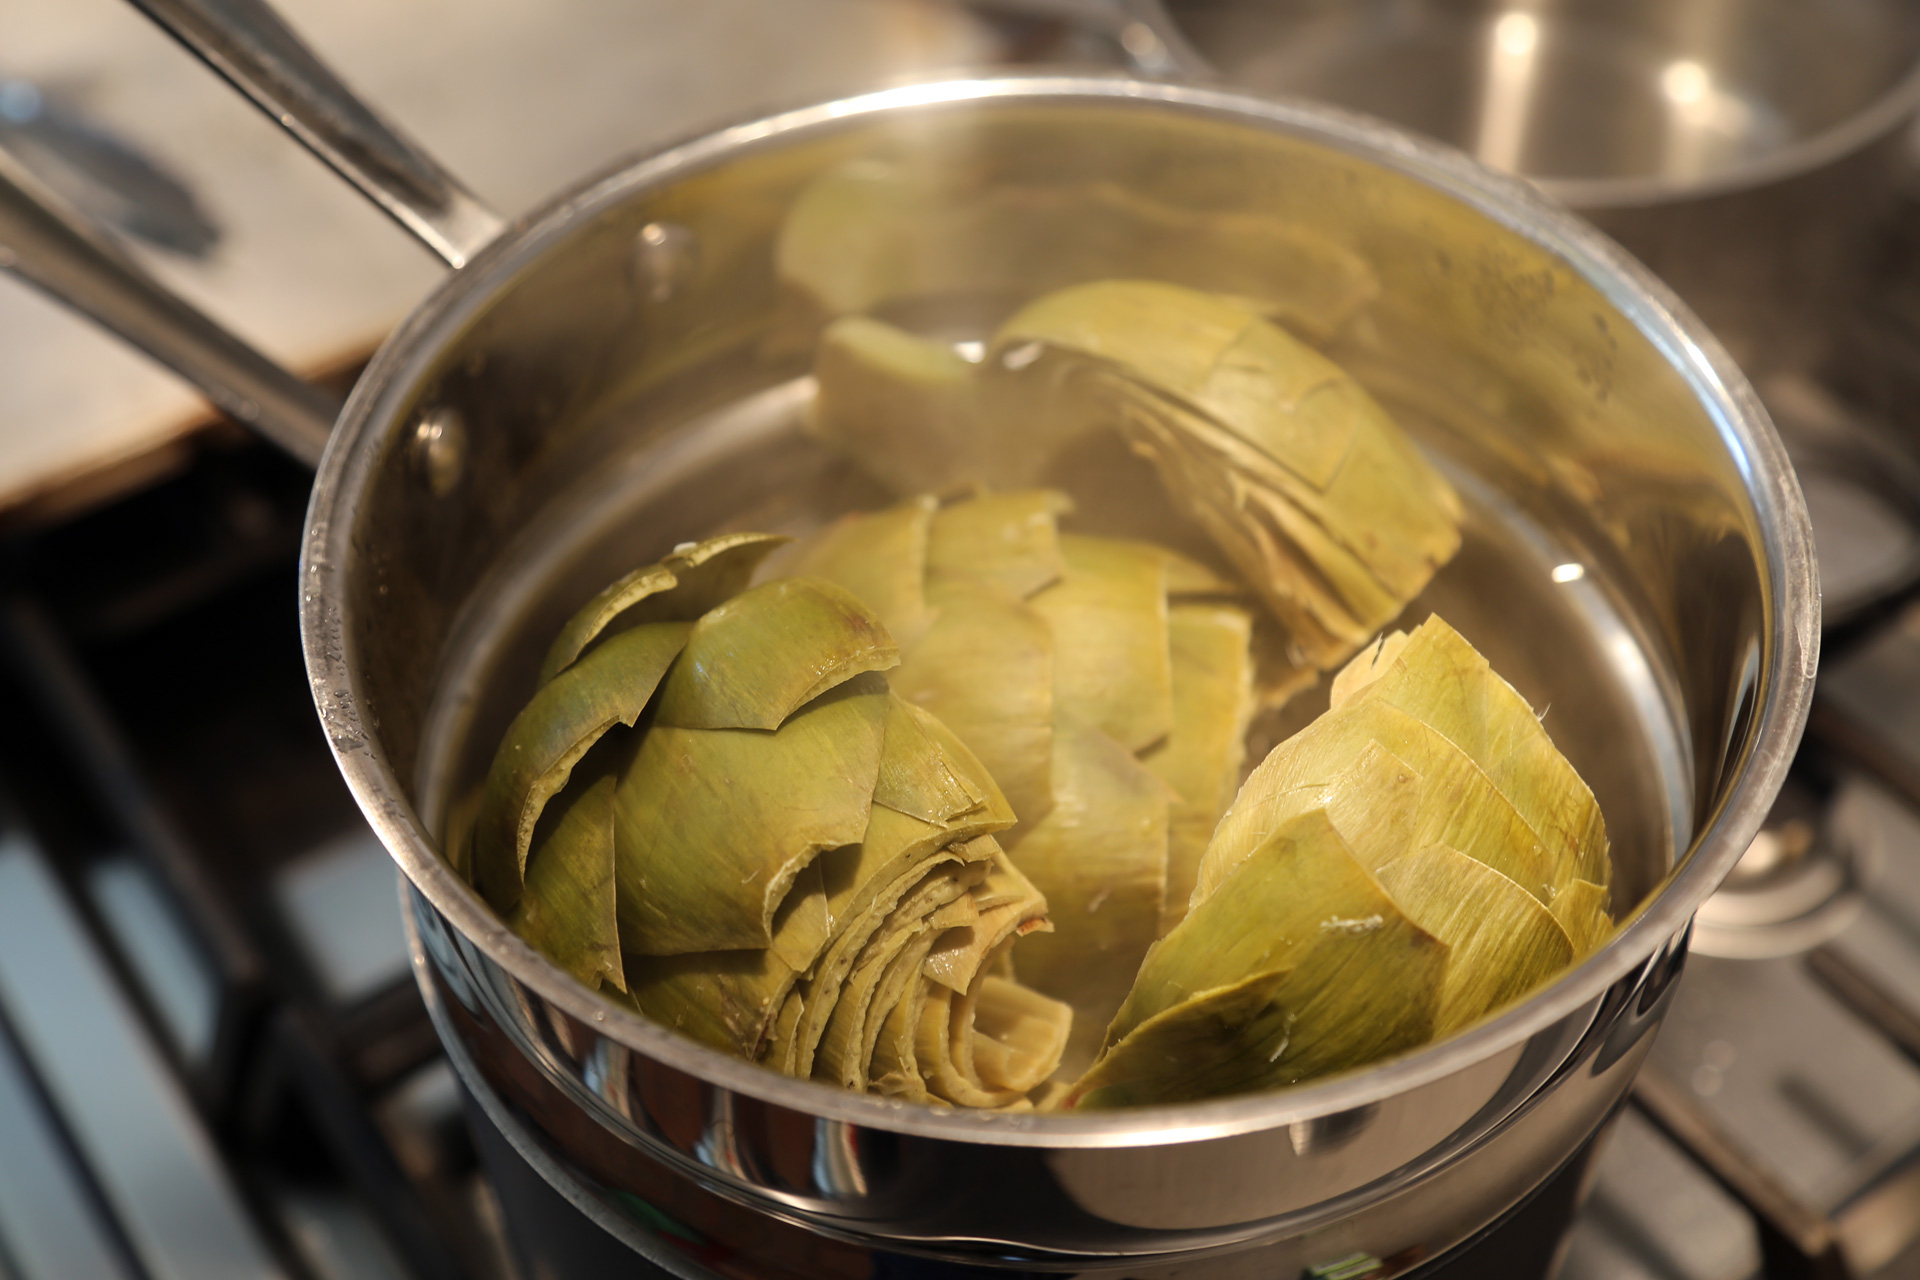 Cover and steam until the heart of the artichoke and the stem is tender when pierced with a paring knife, about 20 minutes. 